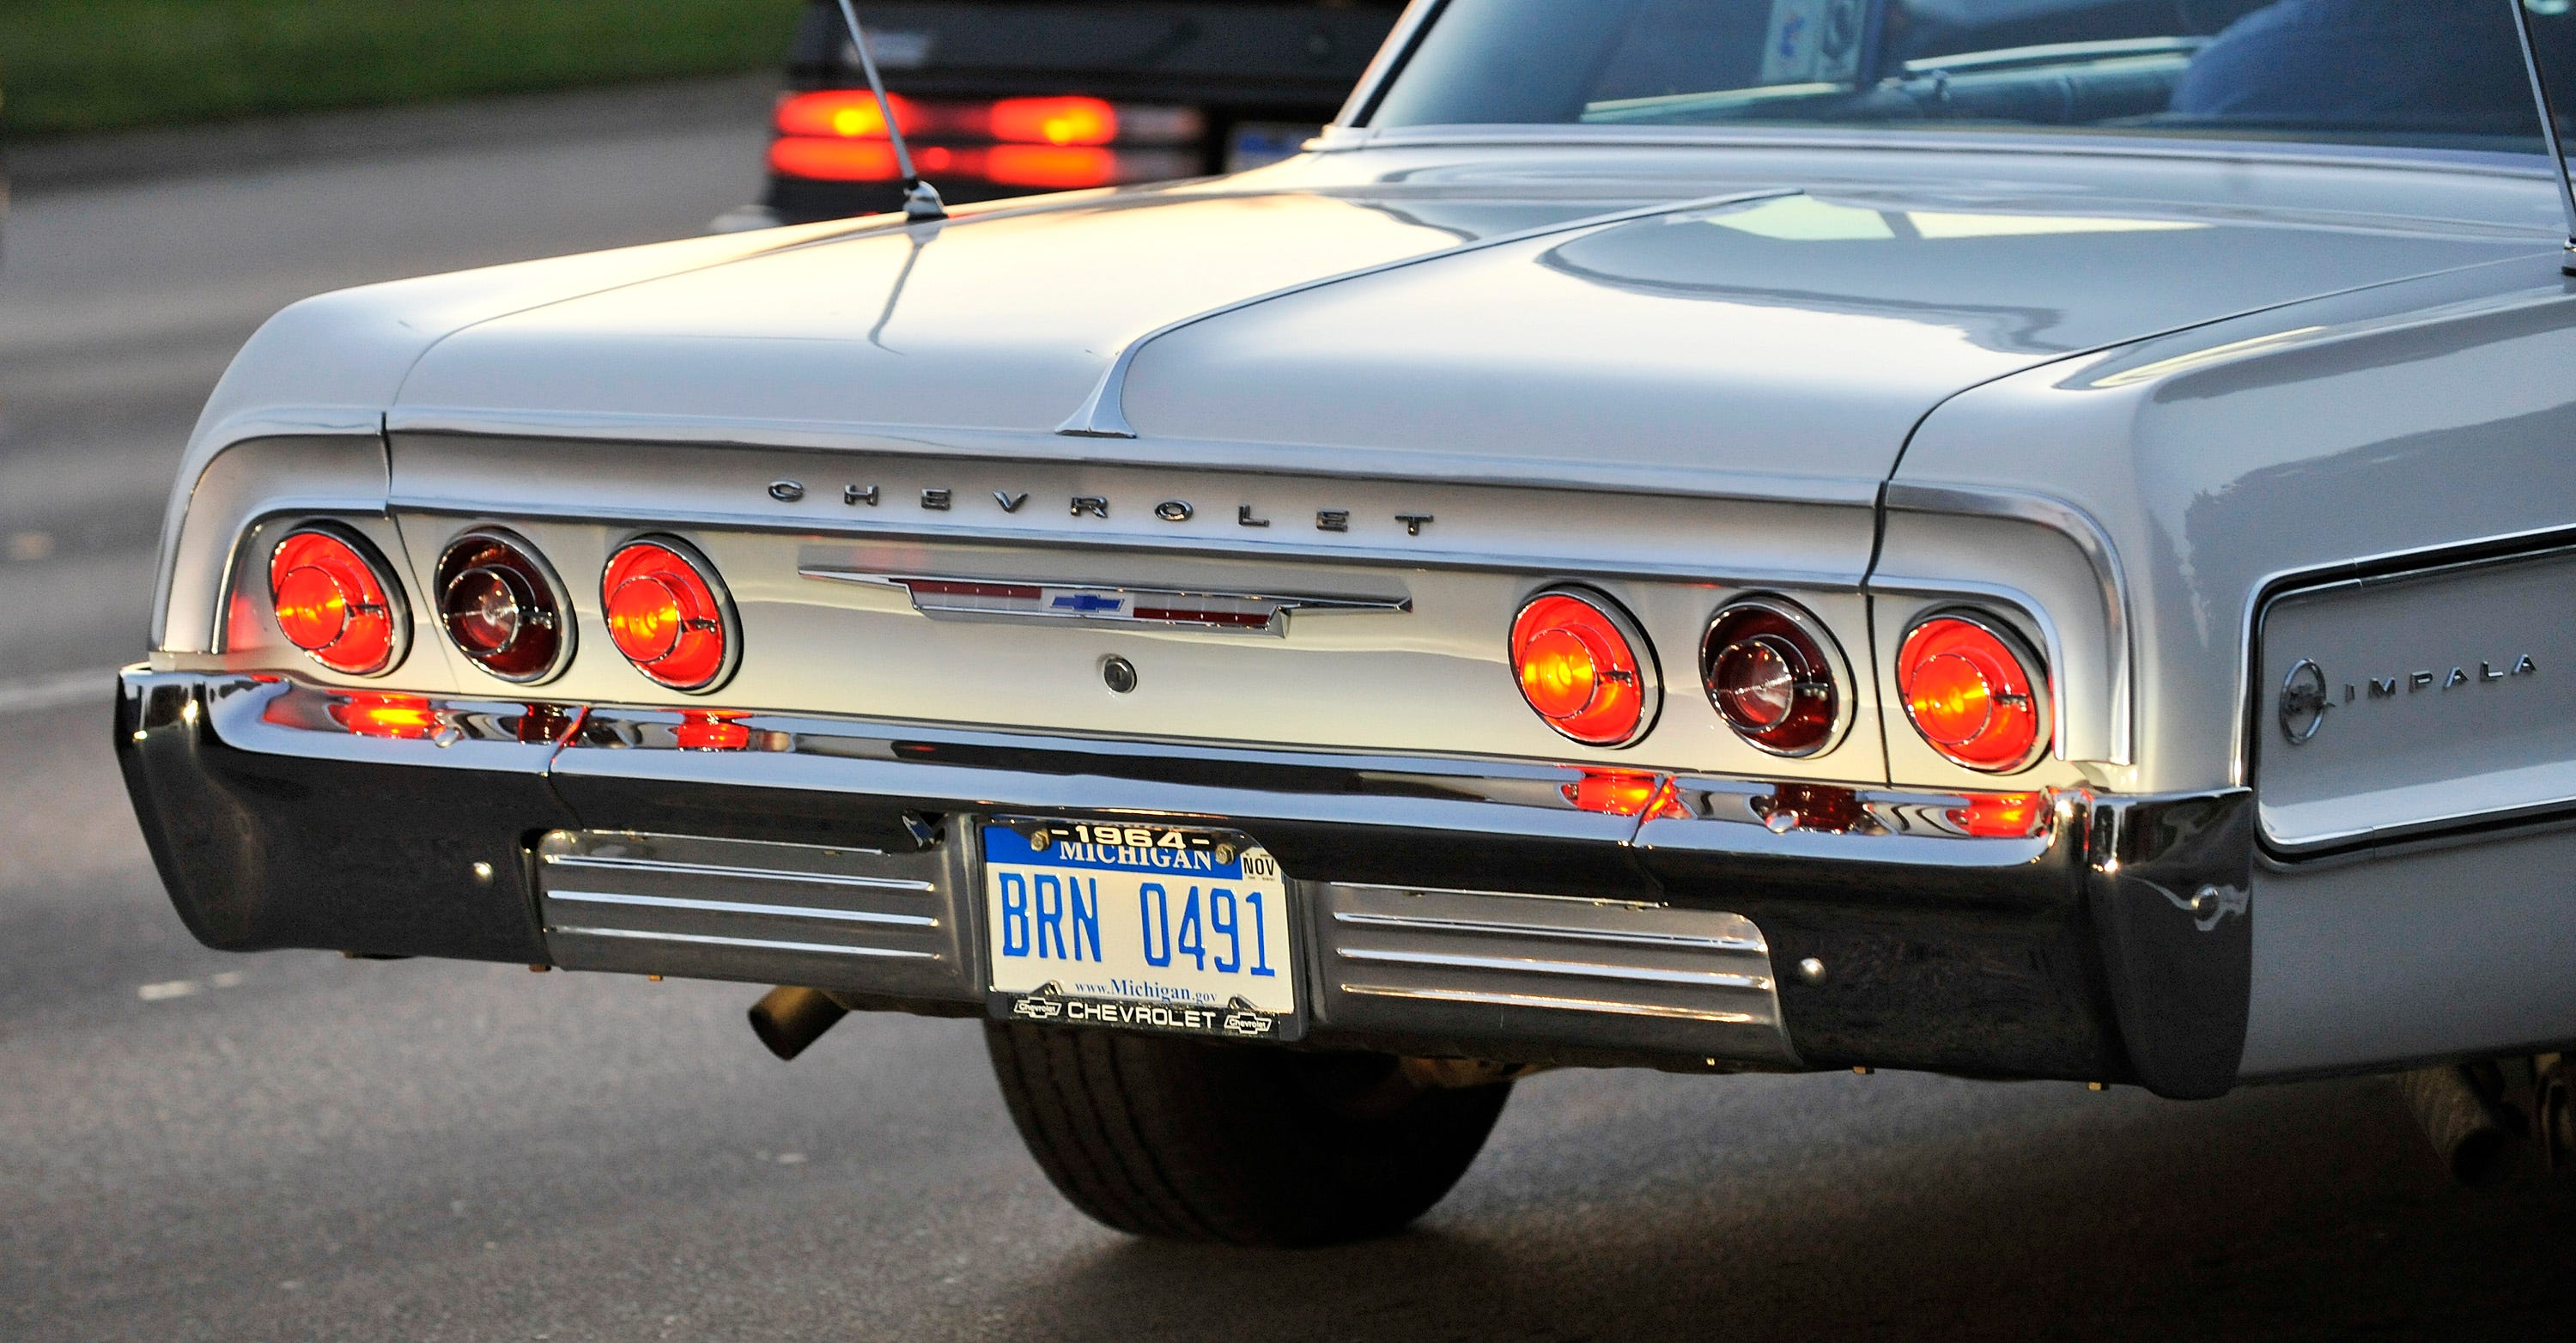 The taillights of a 1964 Chevrolet Impala on Woodward during the Dream Cruise, Aug. 14, 2009.